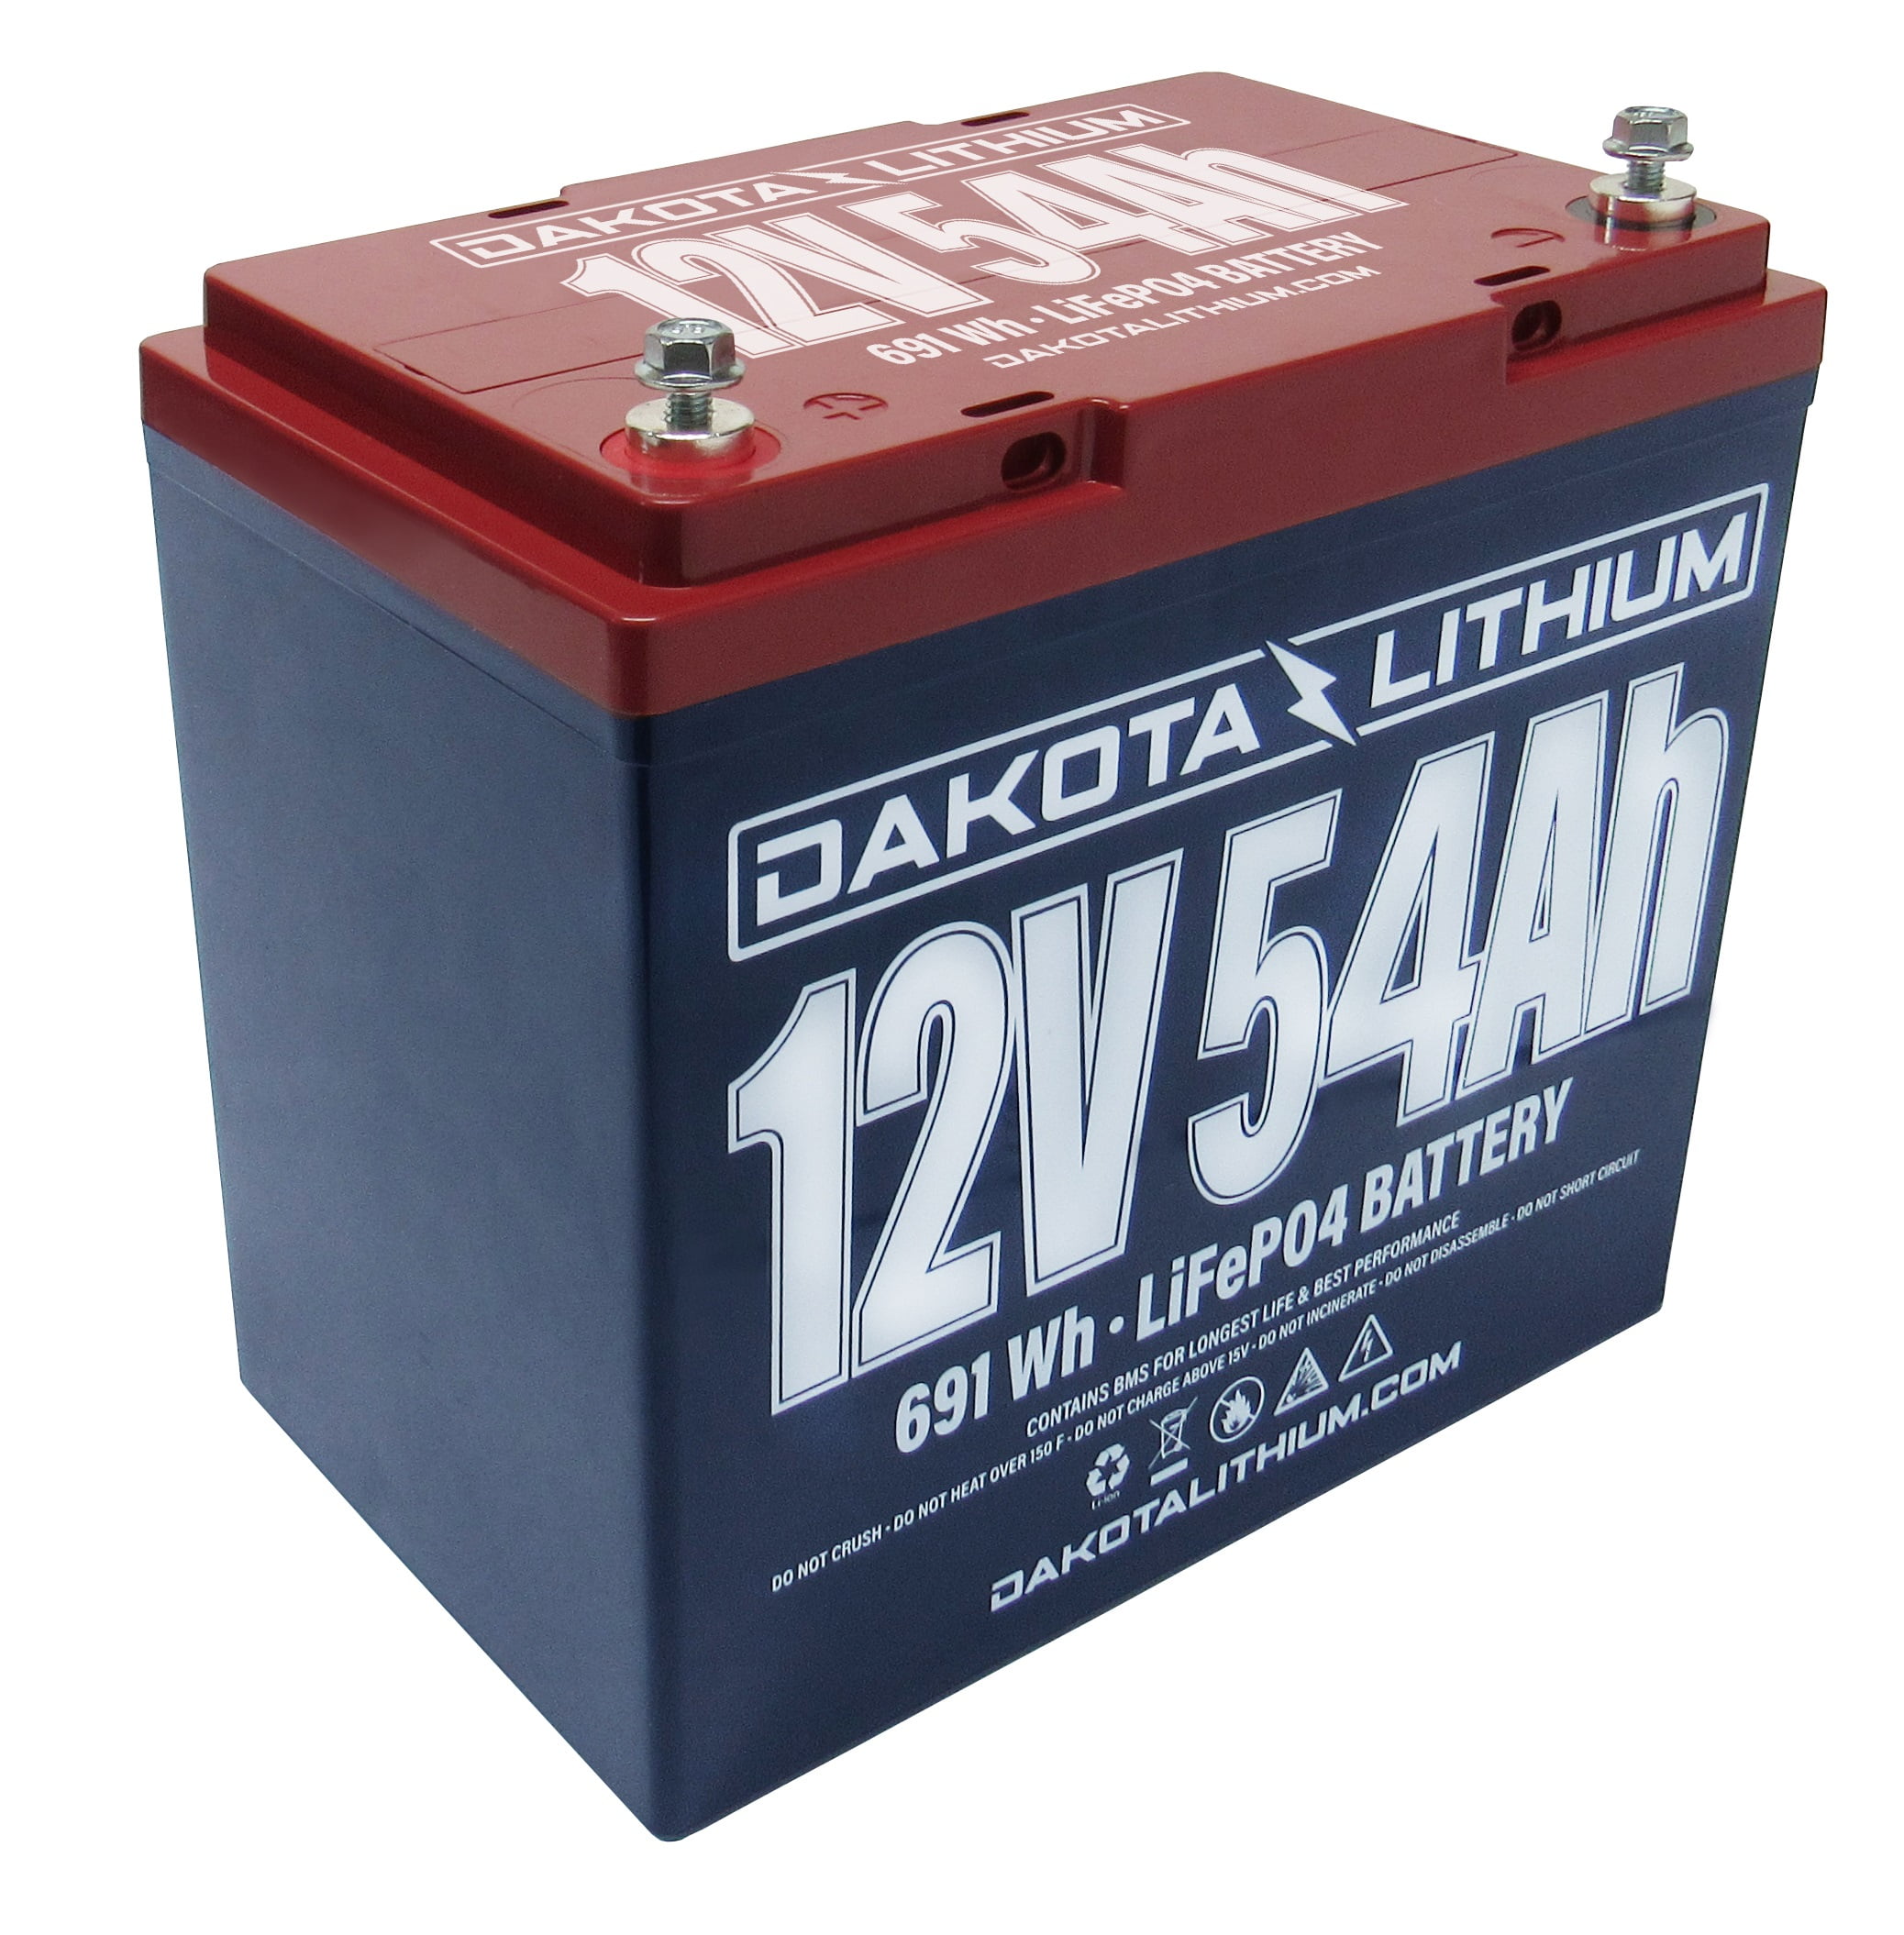 Lithium deep cycle battery